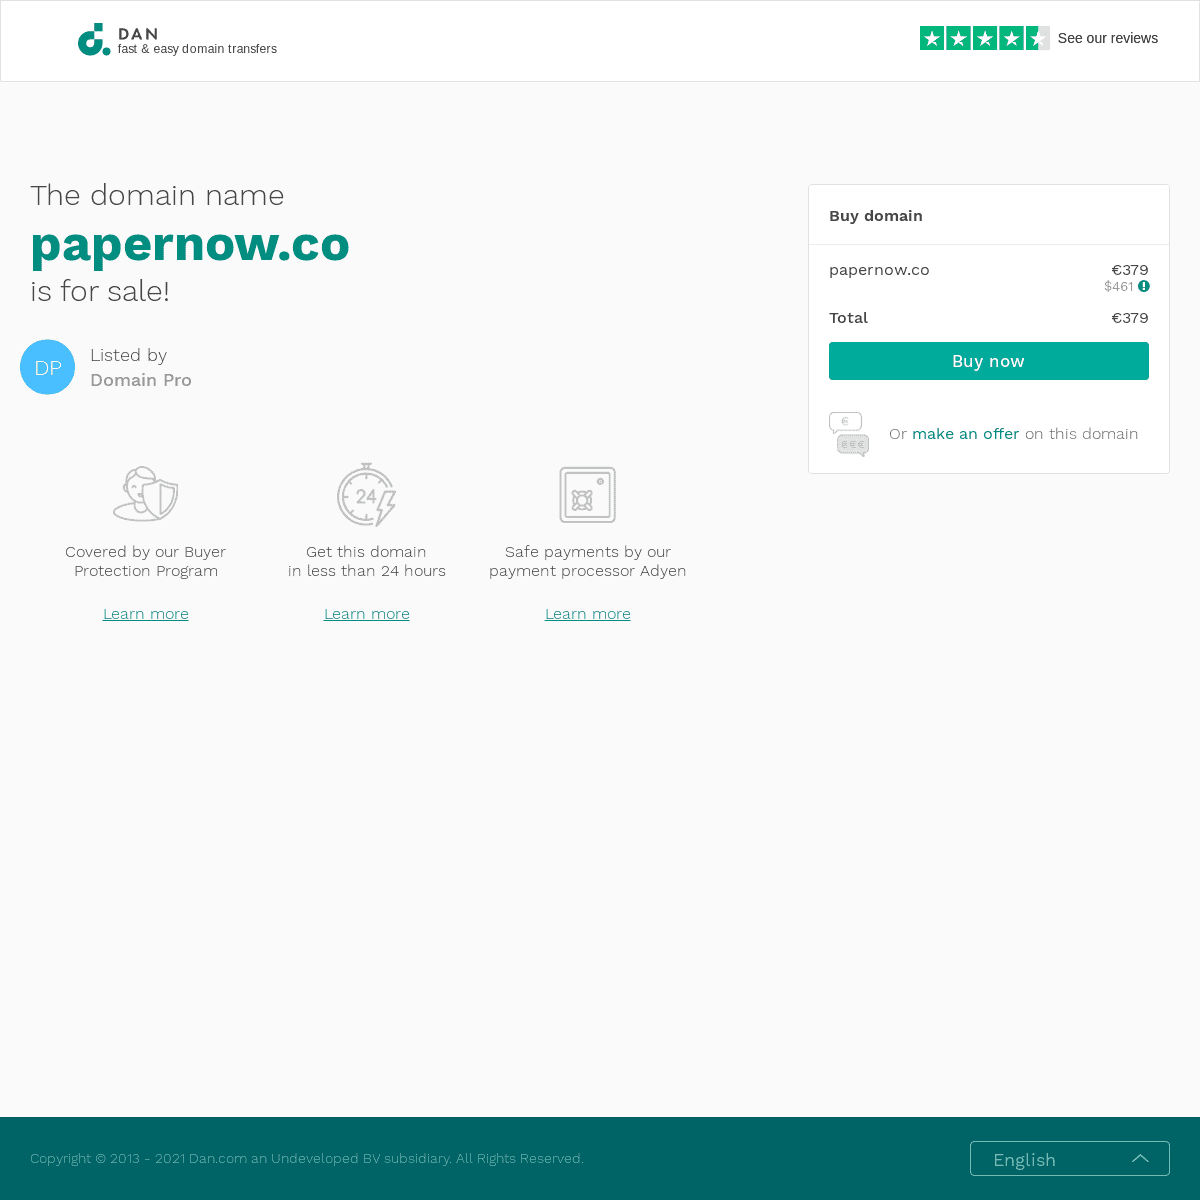 A complete backup of https://papernow.co